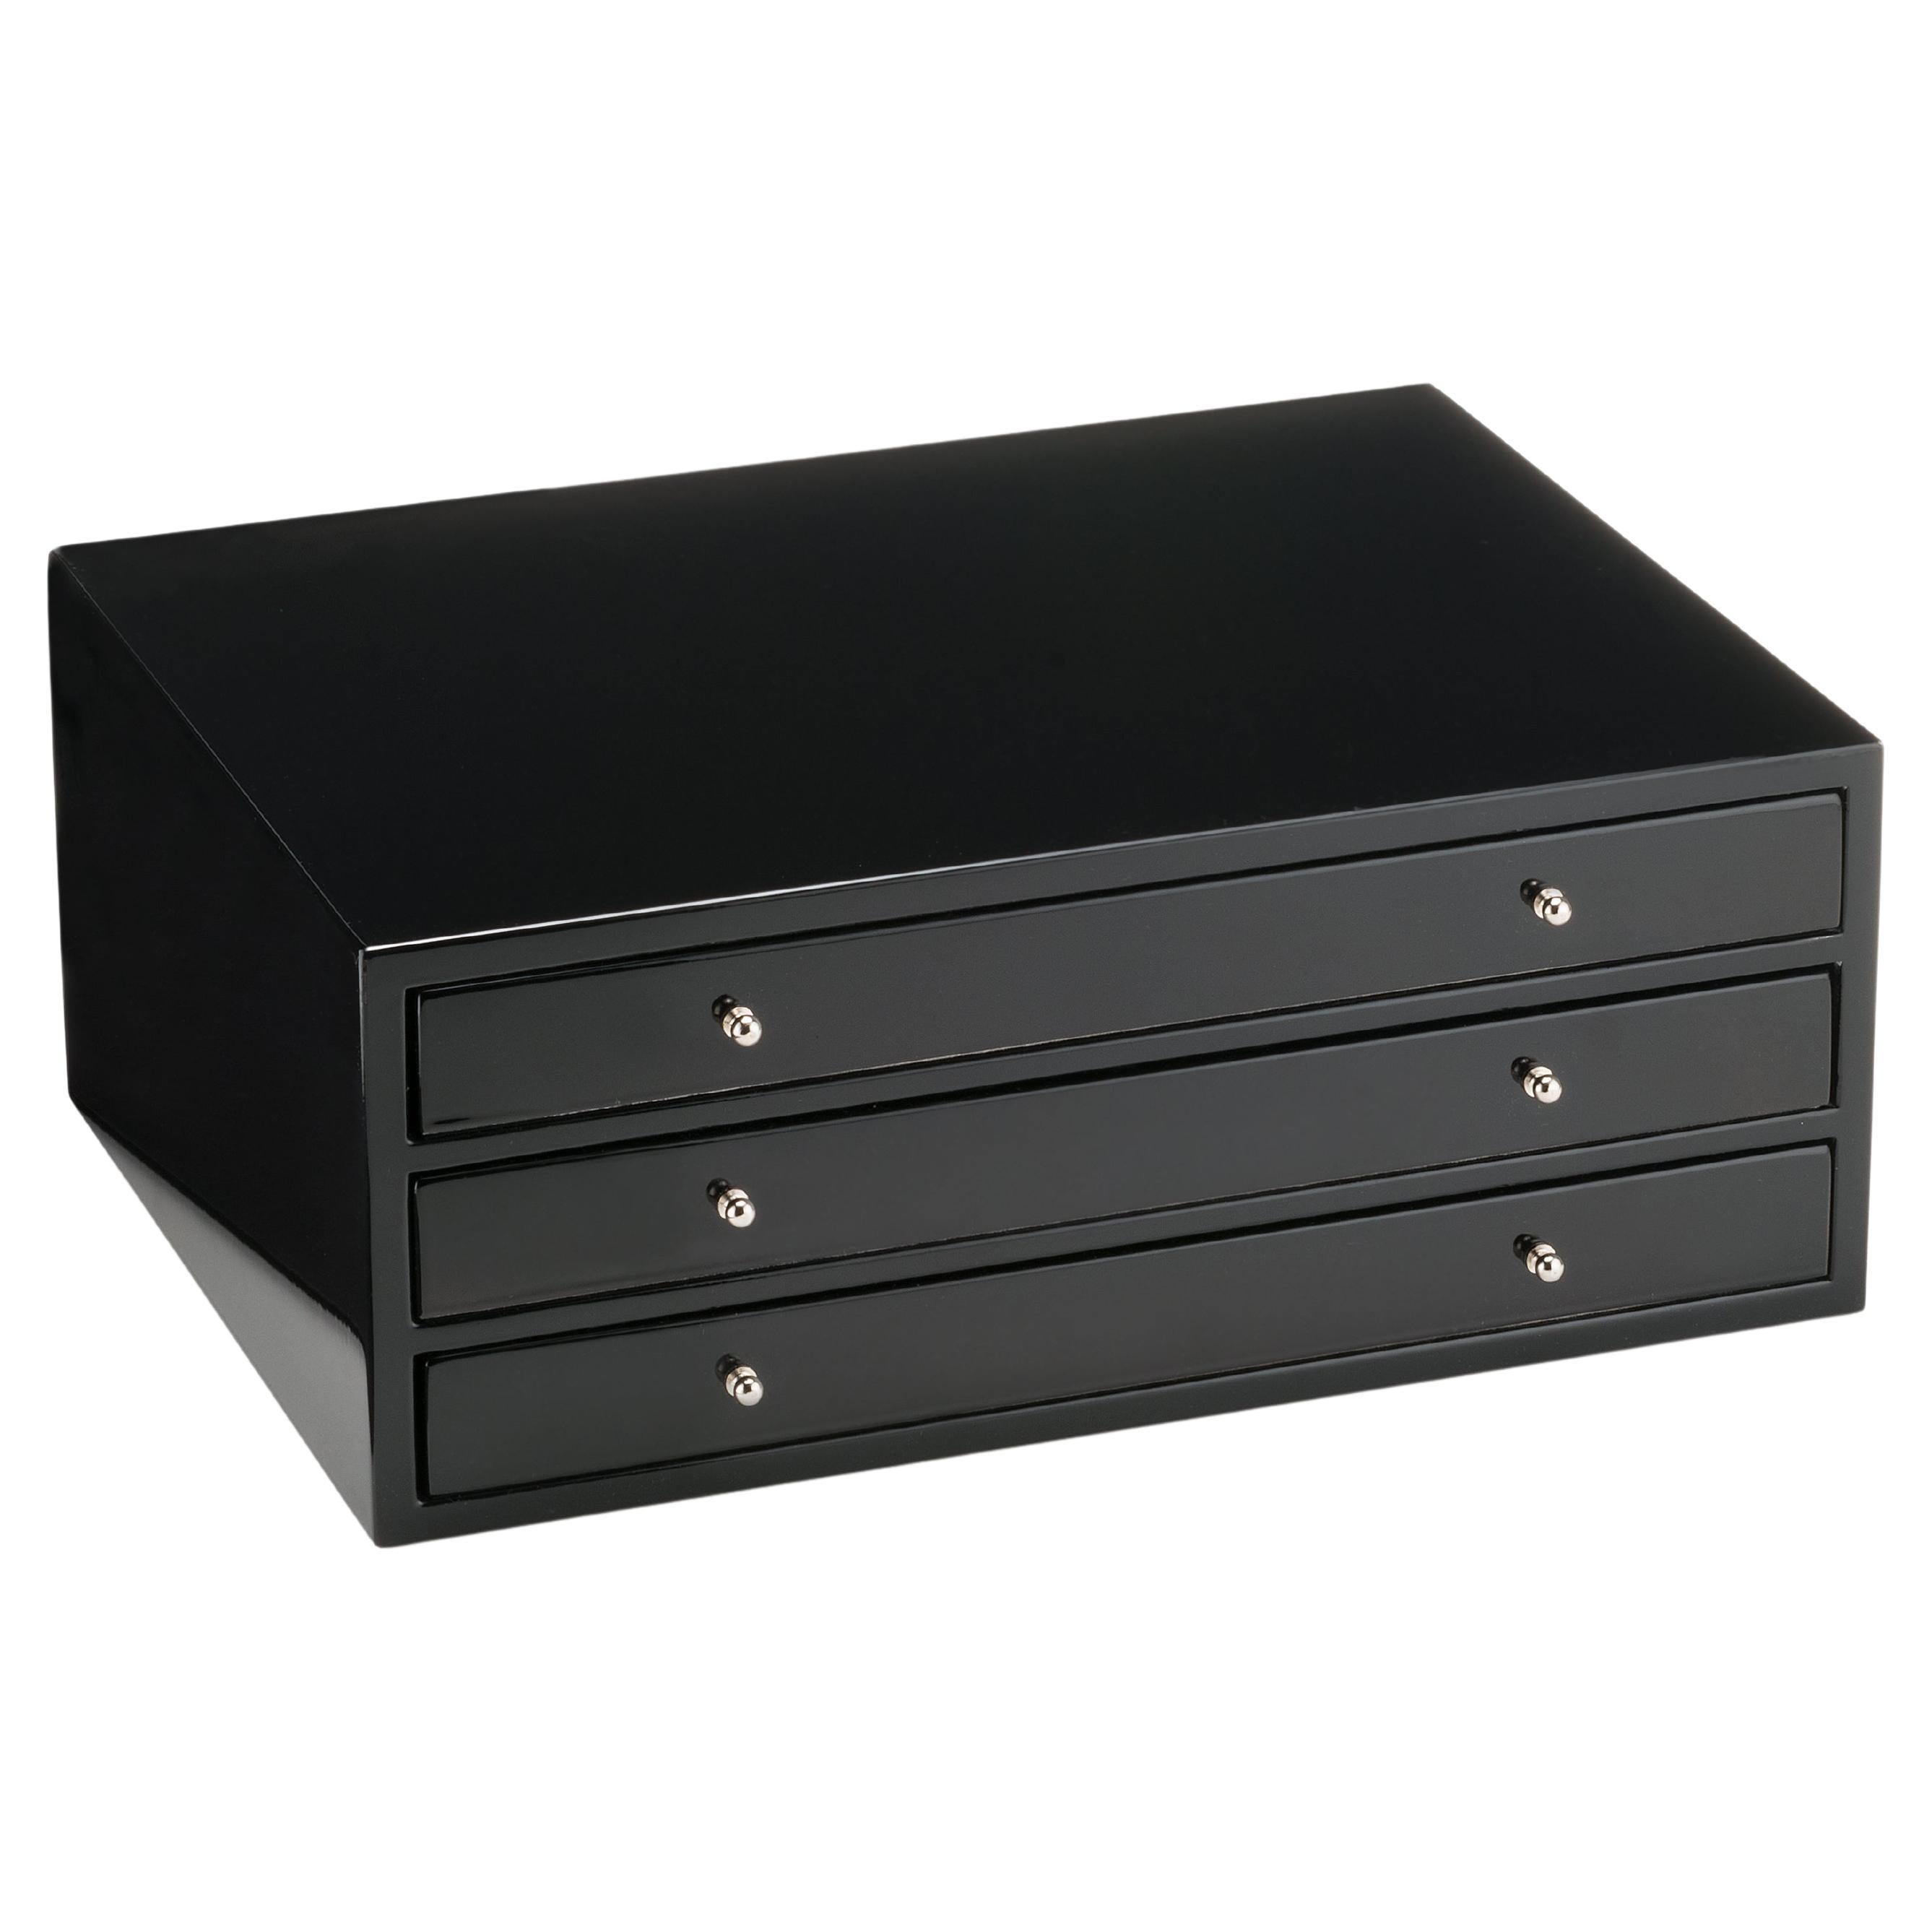 Firenze 3 Drawers Black For Sale